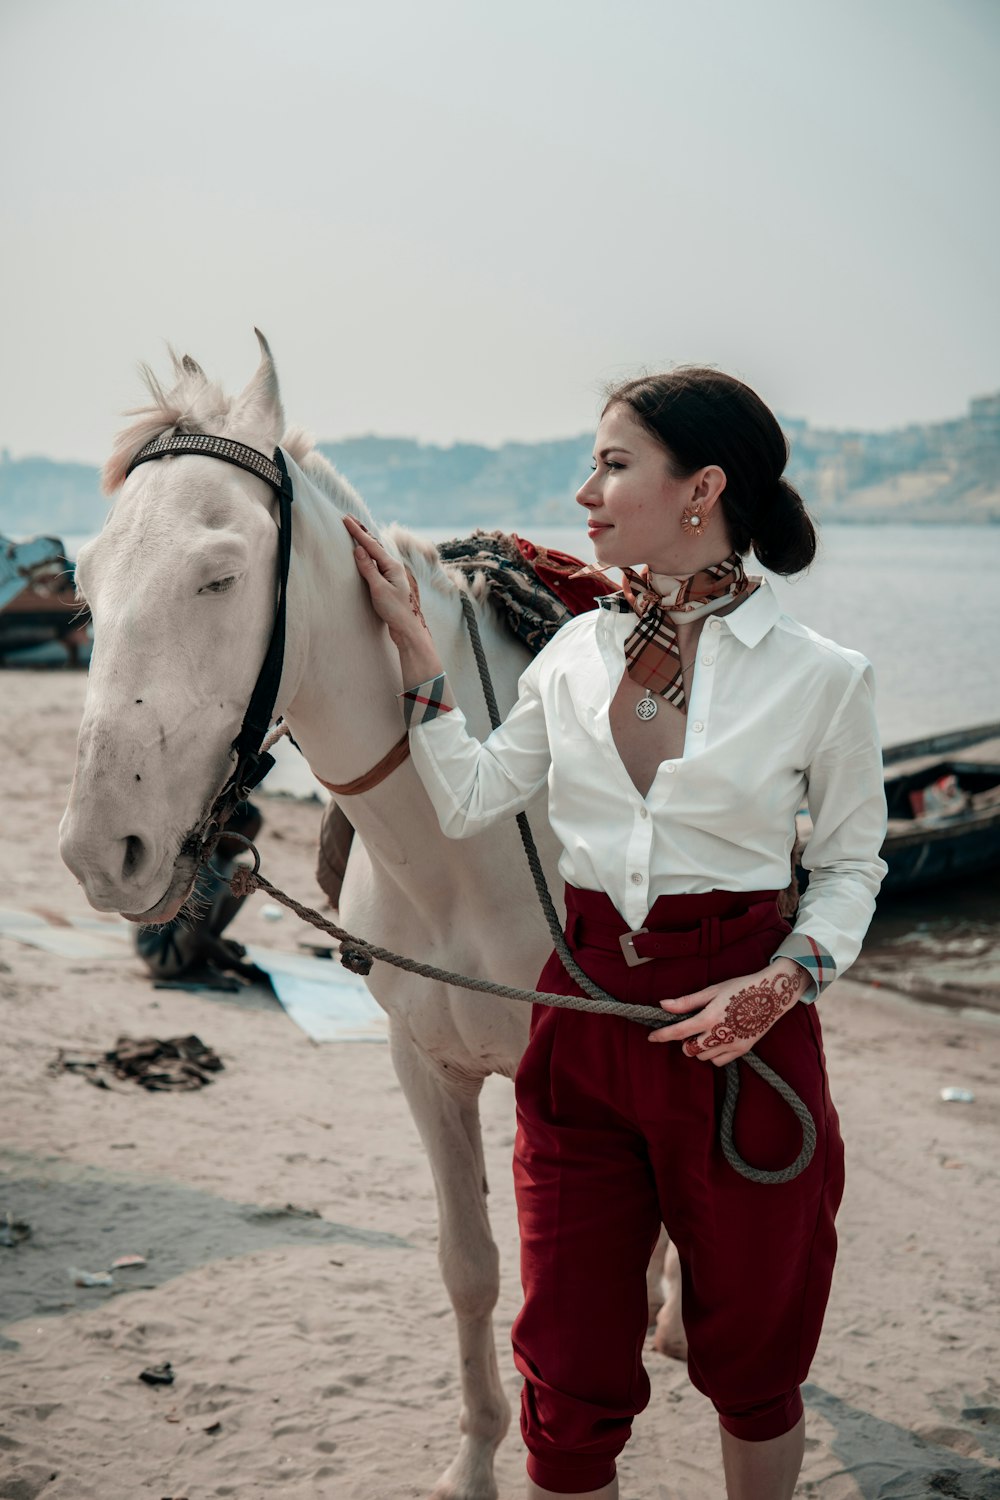 woman in white long sleeve shirt riding white horse during daytime